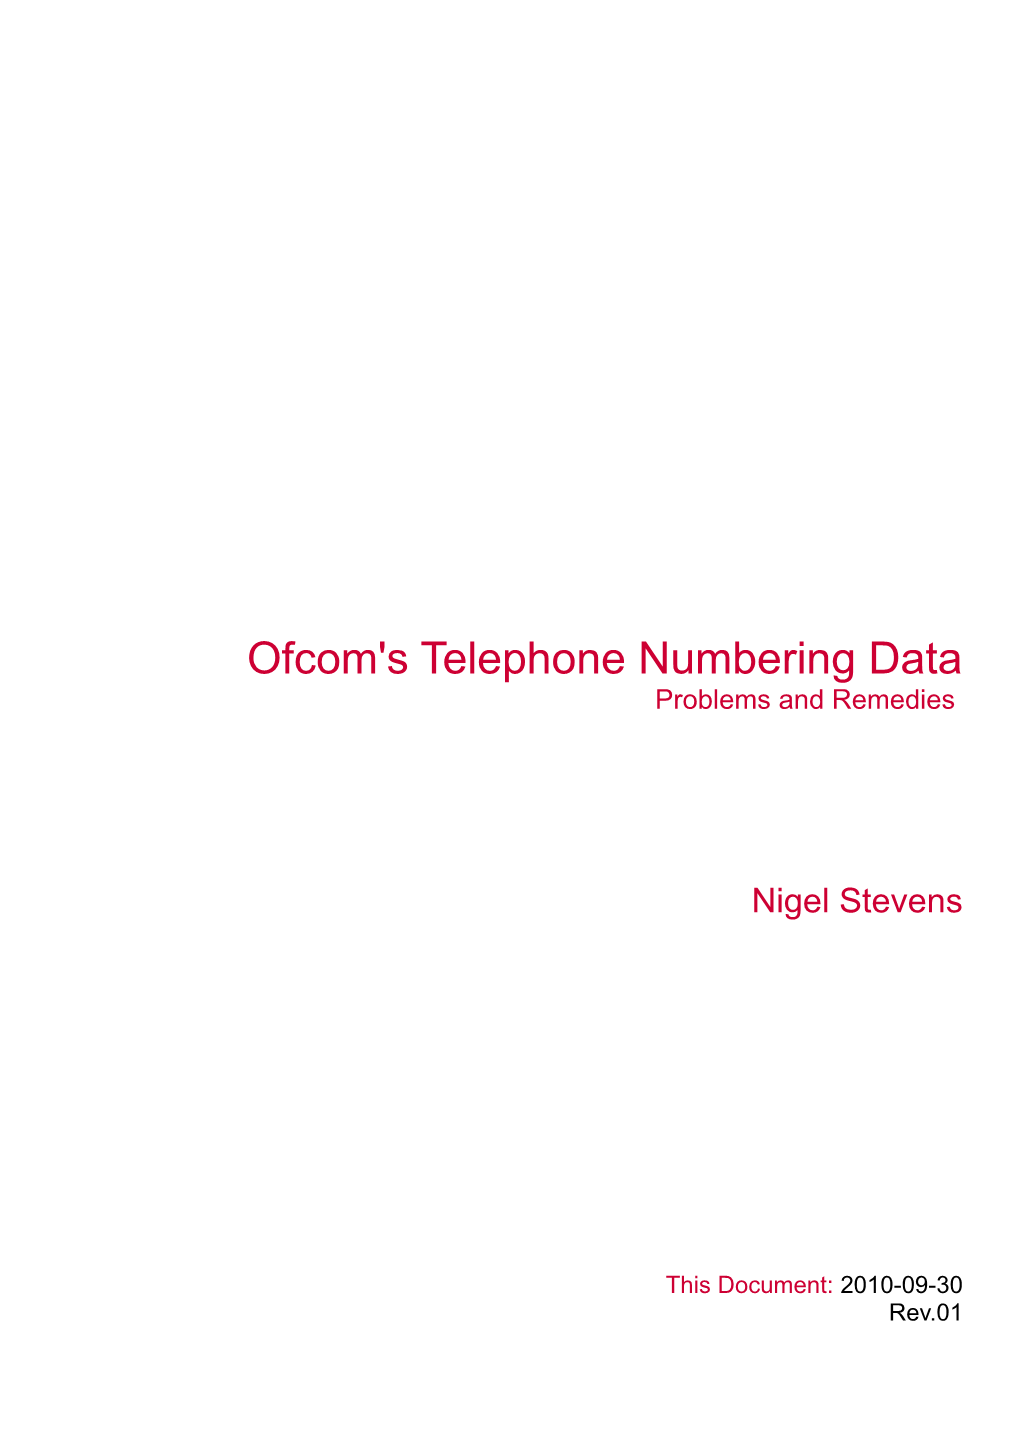 Ofcom's Telephone Numbering Data Problems and Remedies